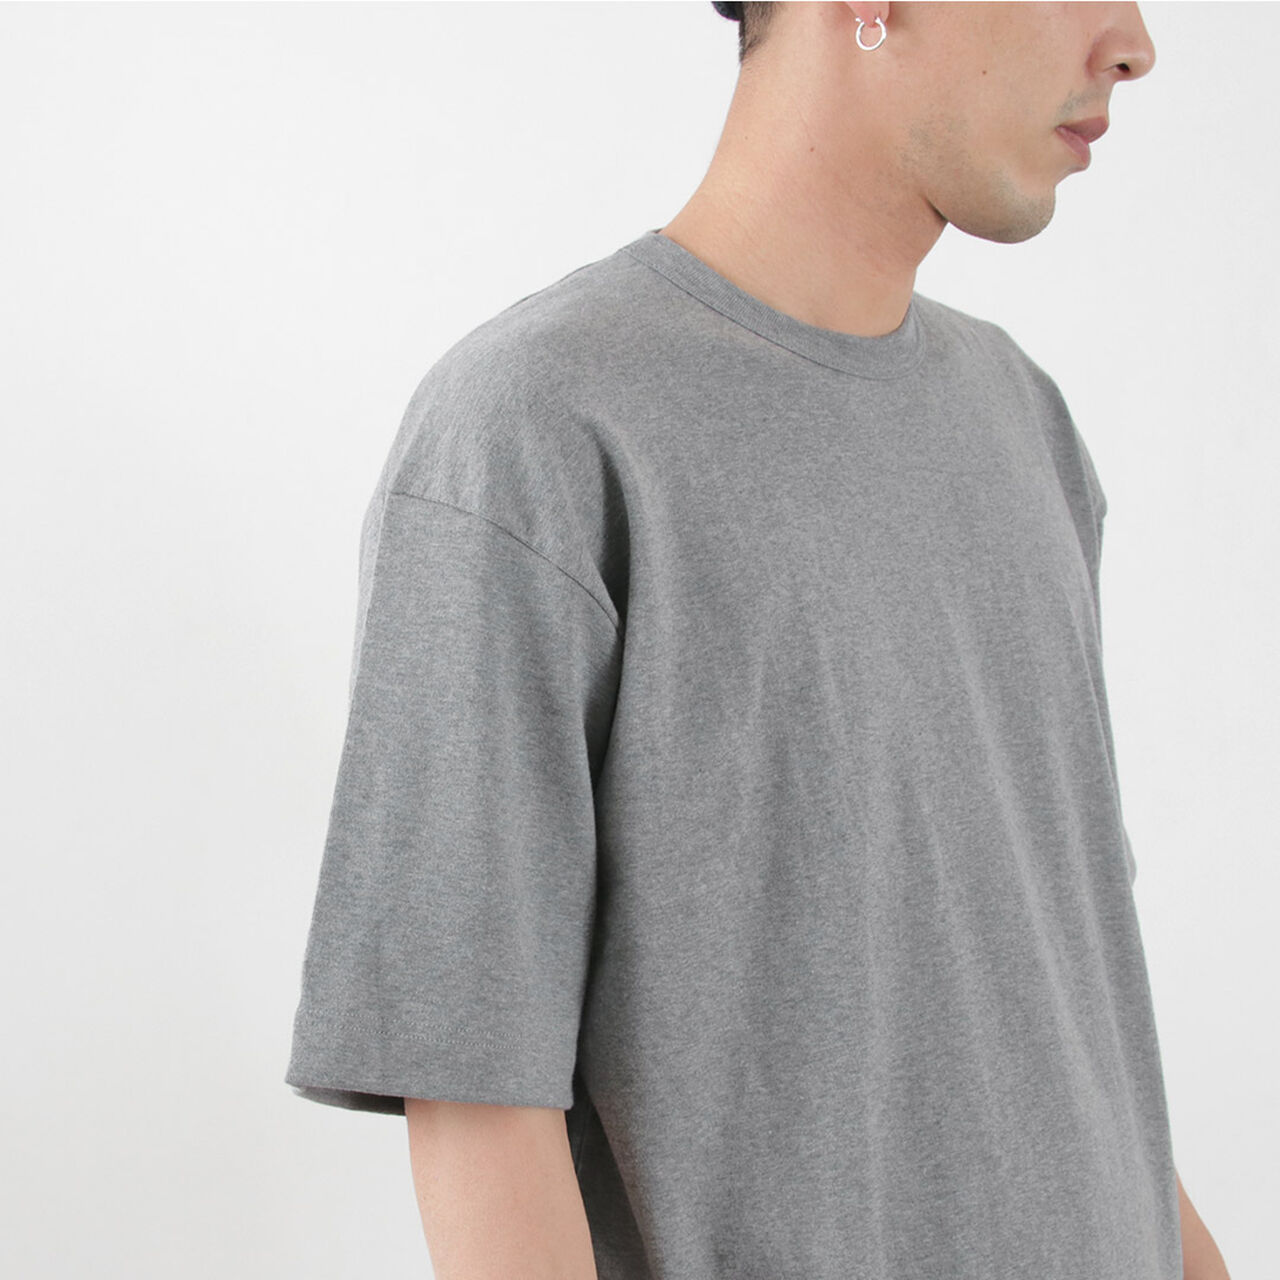 TONNNO Relaxed Fit Crew Neck T-Shirt,, large image number 10